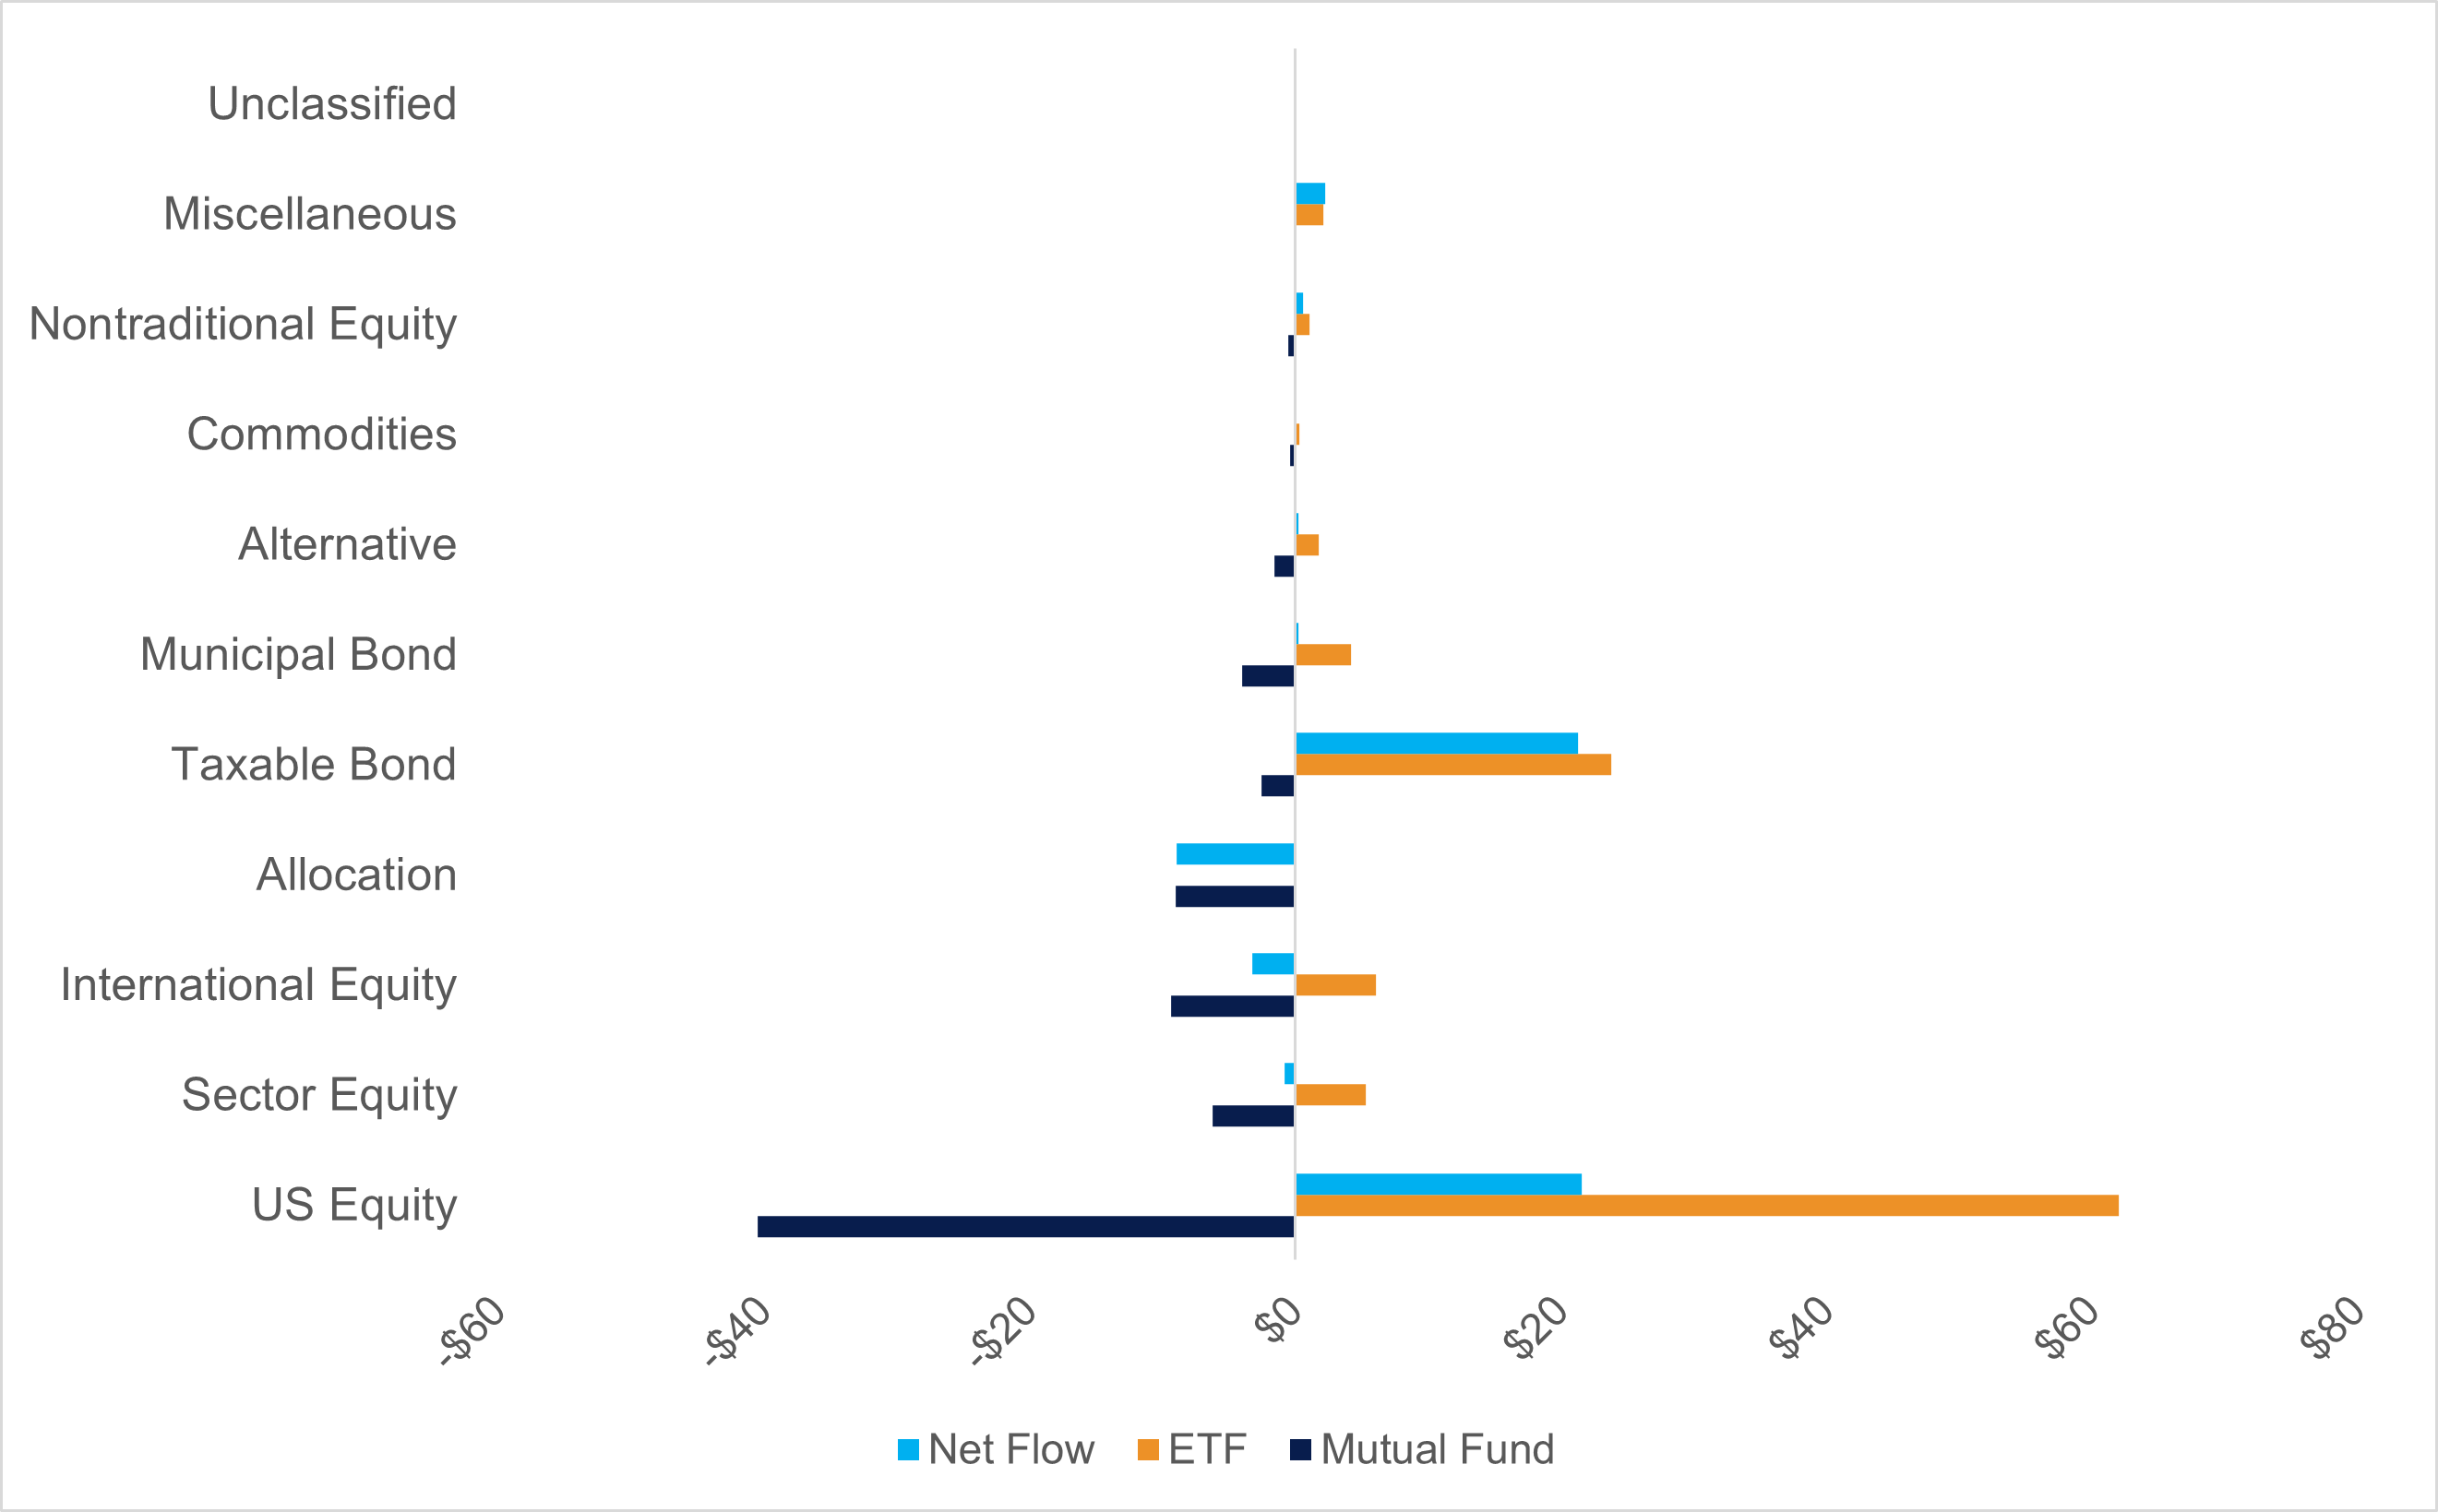 Bar graph of trailing one-month net asset flows across asset classes for November 2023 in billions of dollars, as described in preceding paragraph.